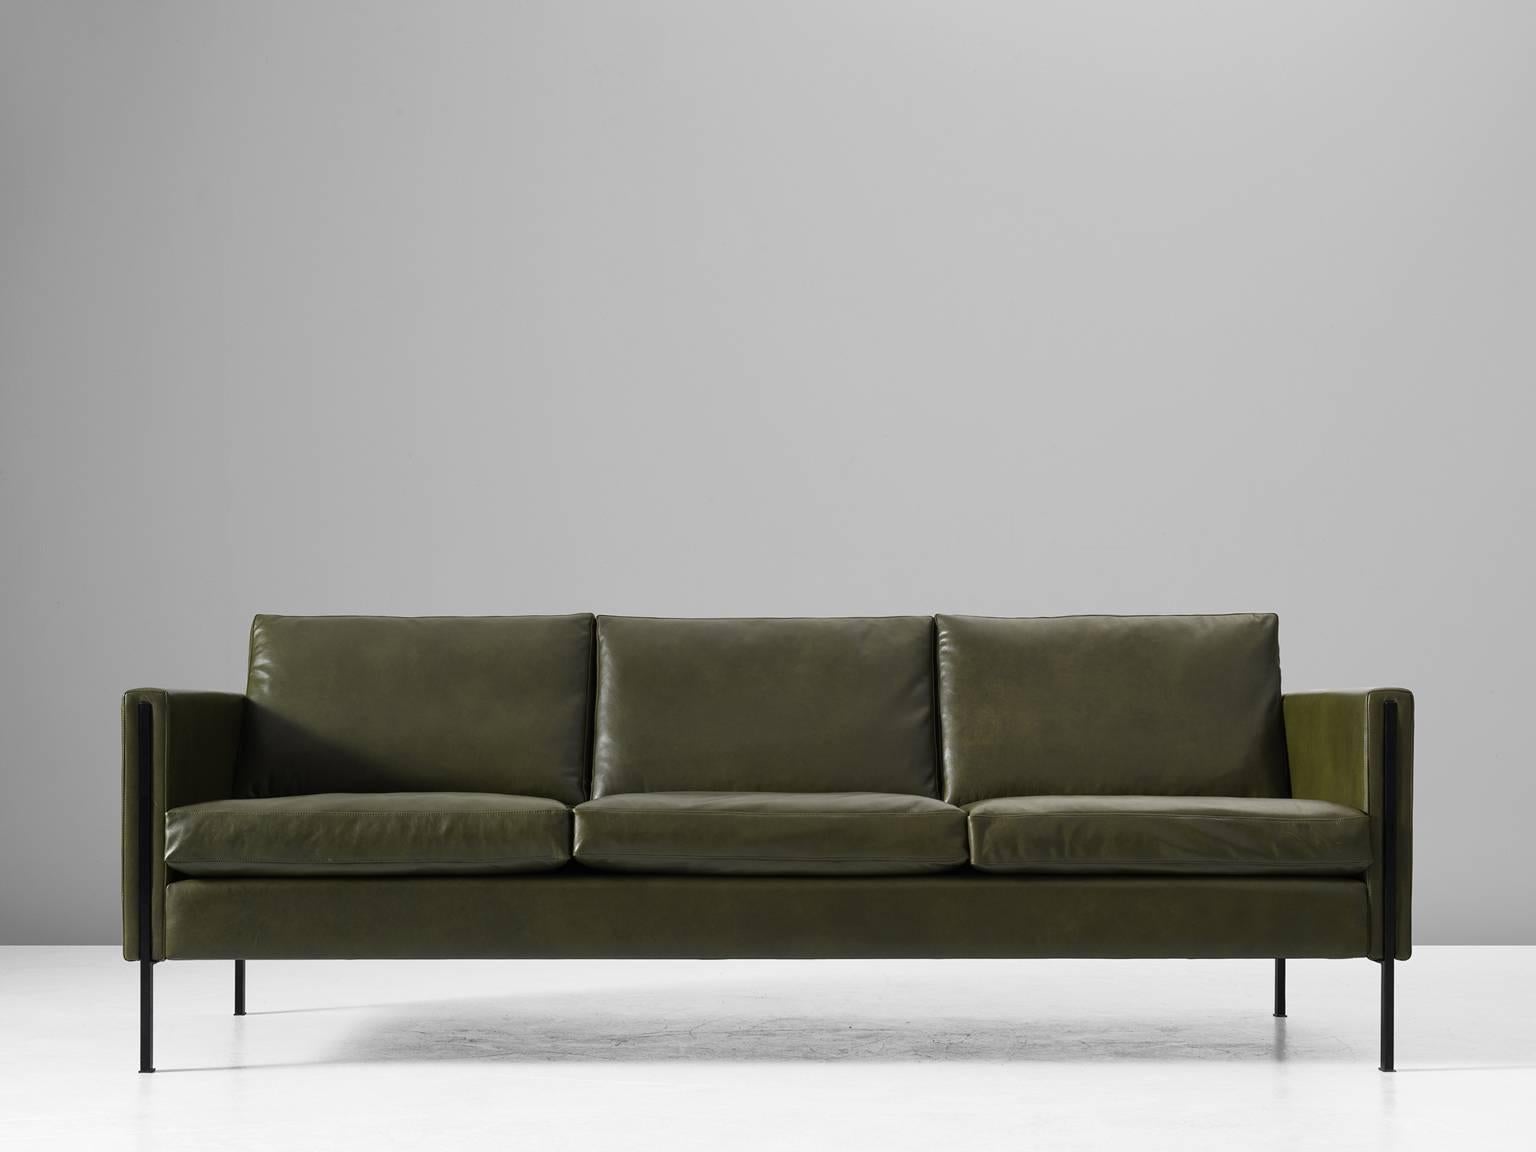 Sofa model '442/3', in leather and steel by Pierre Paulin for Artifort, the Netherlands 1962. 

This comfortable three-seat sofa shows elegant steel details. The combination of black coated steel and the green leather upholstery gives this sofa